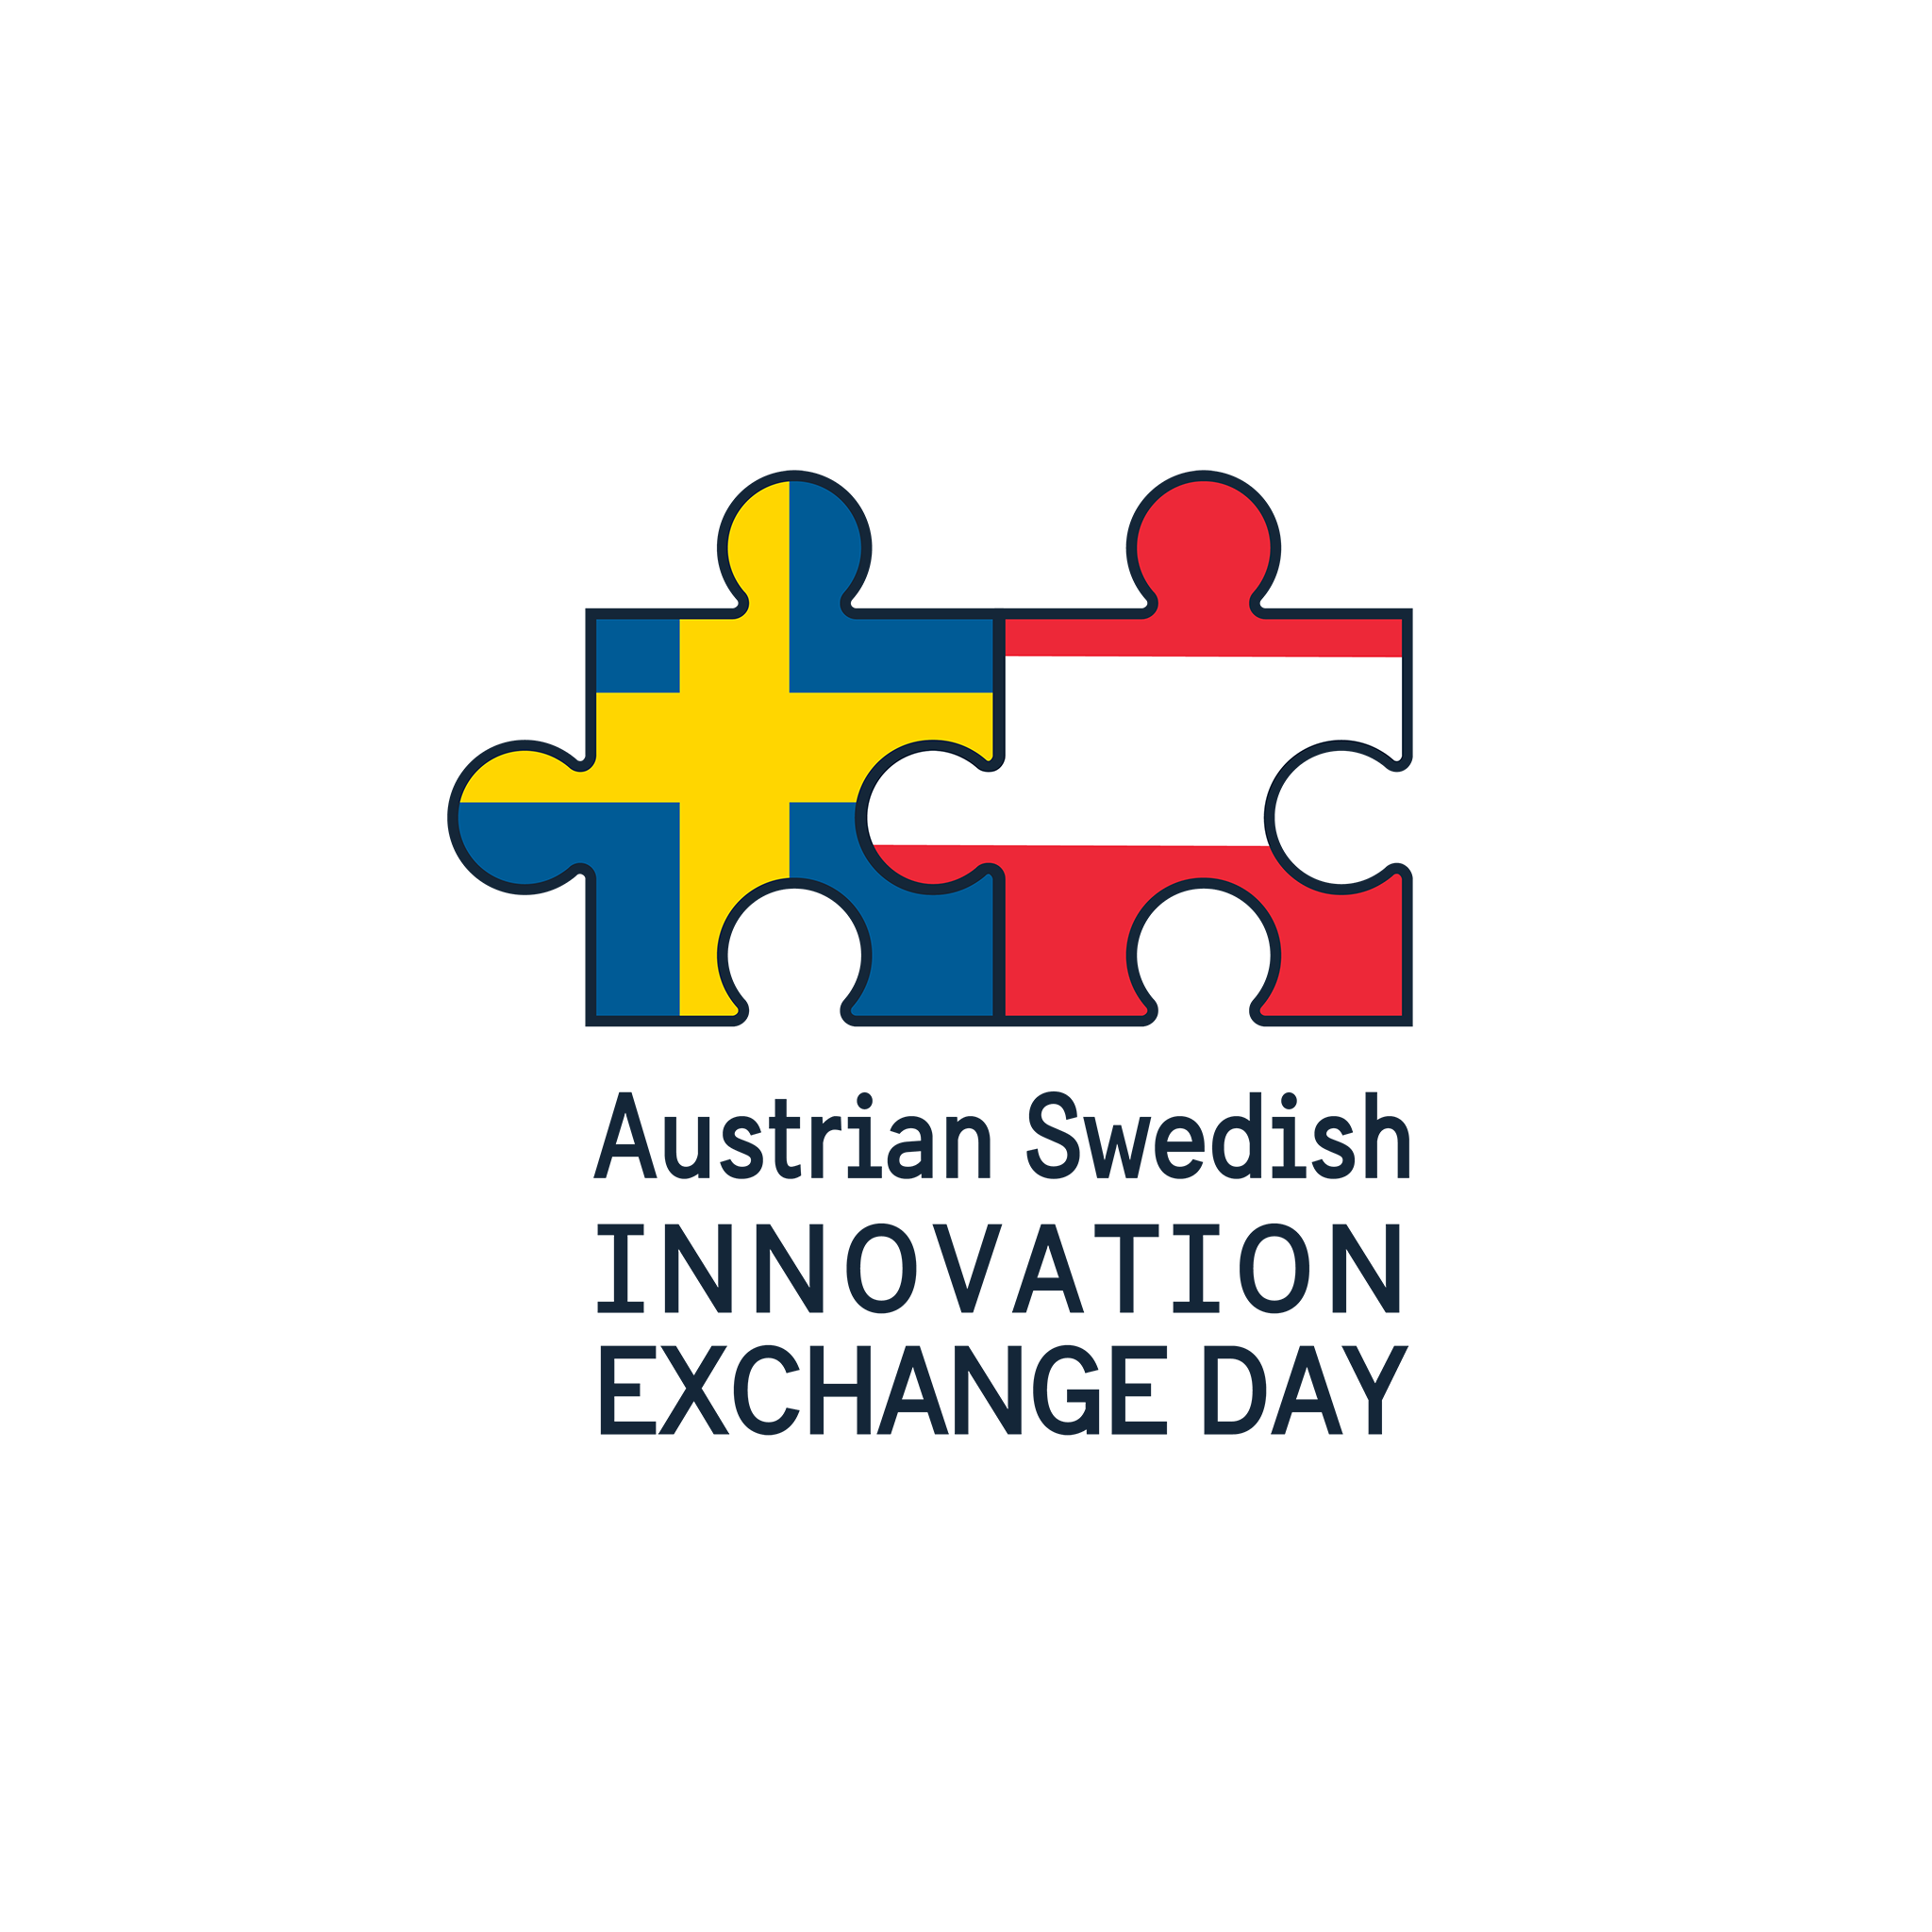 Sweden and Austrian flags in interlocking puzzle pieces with text Austrian Sweden Innovation exchange Day underneath